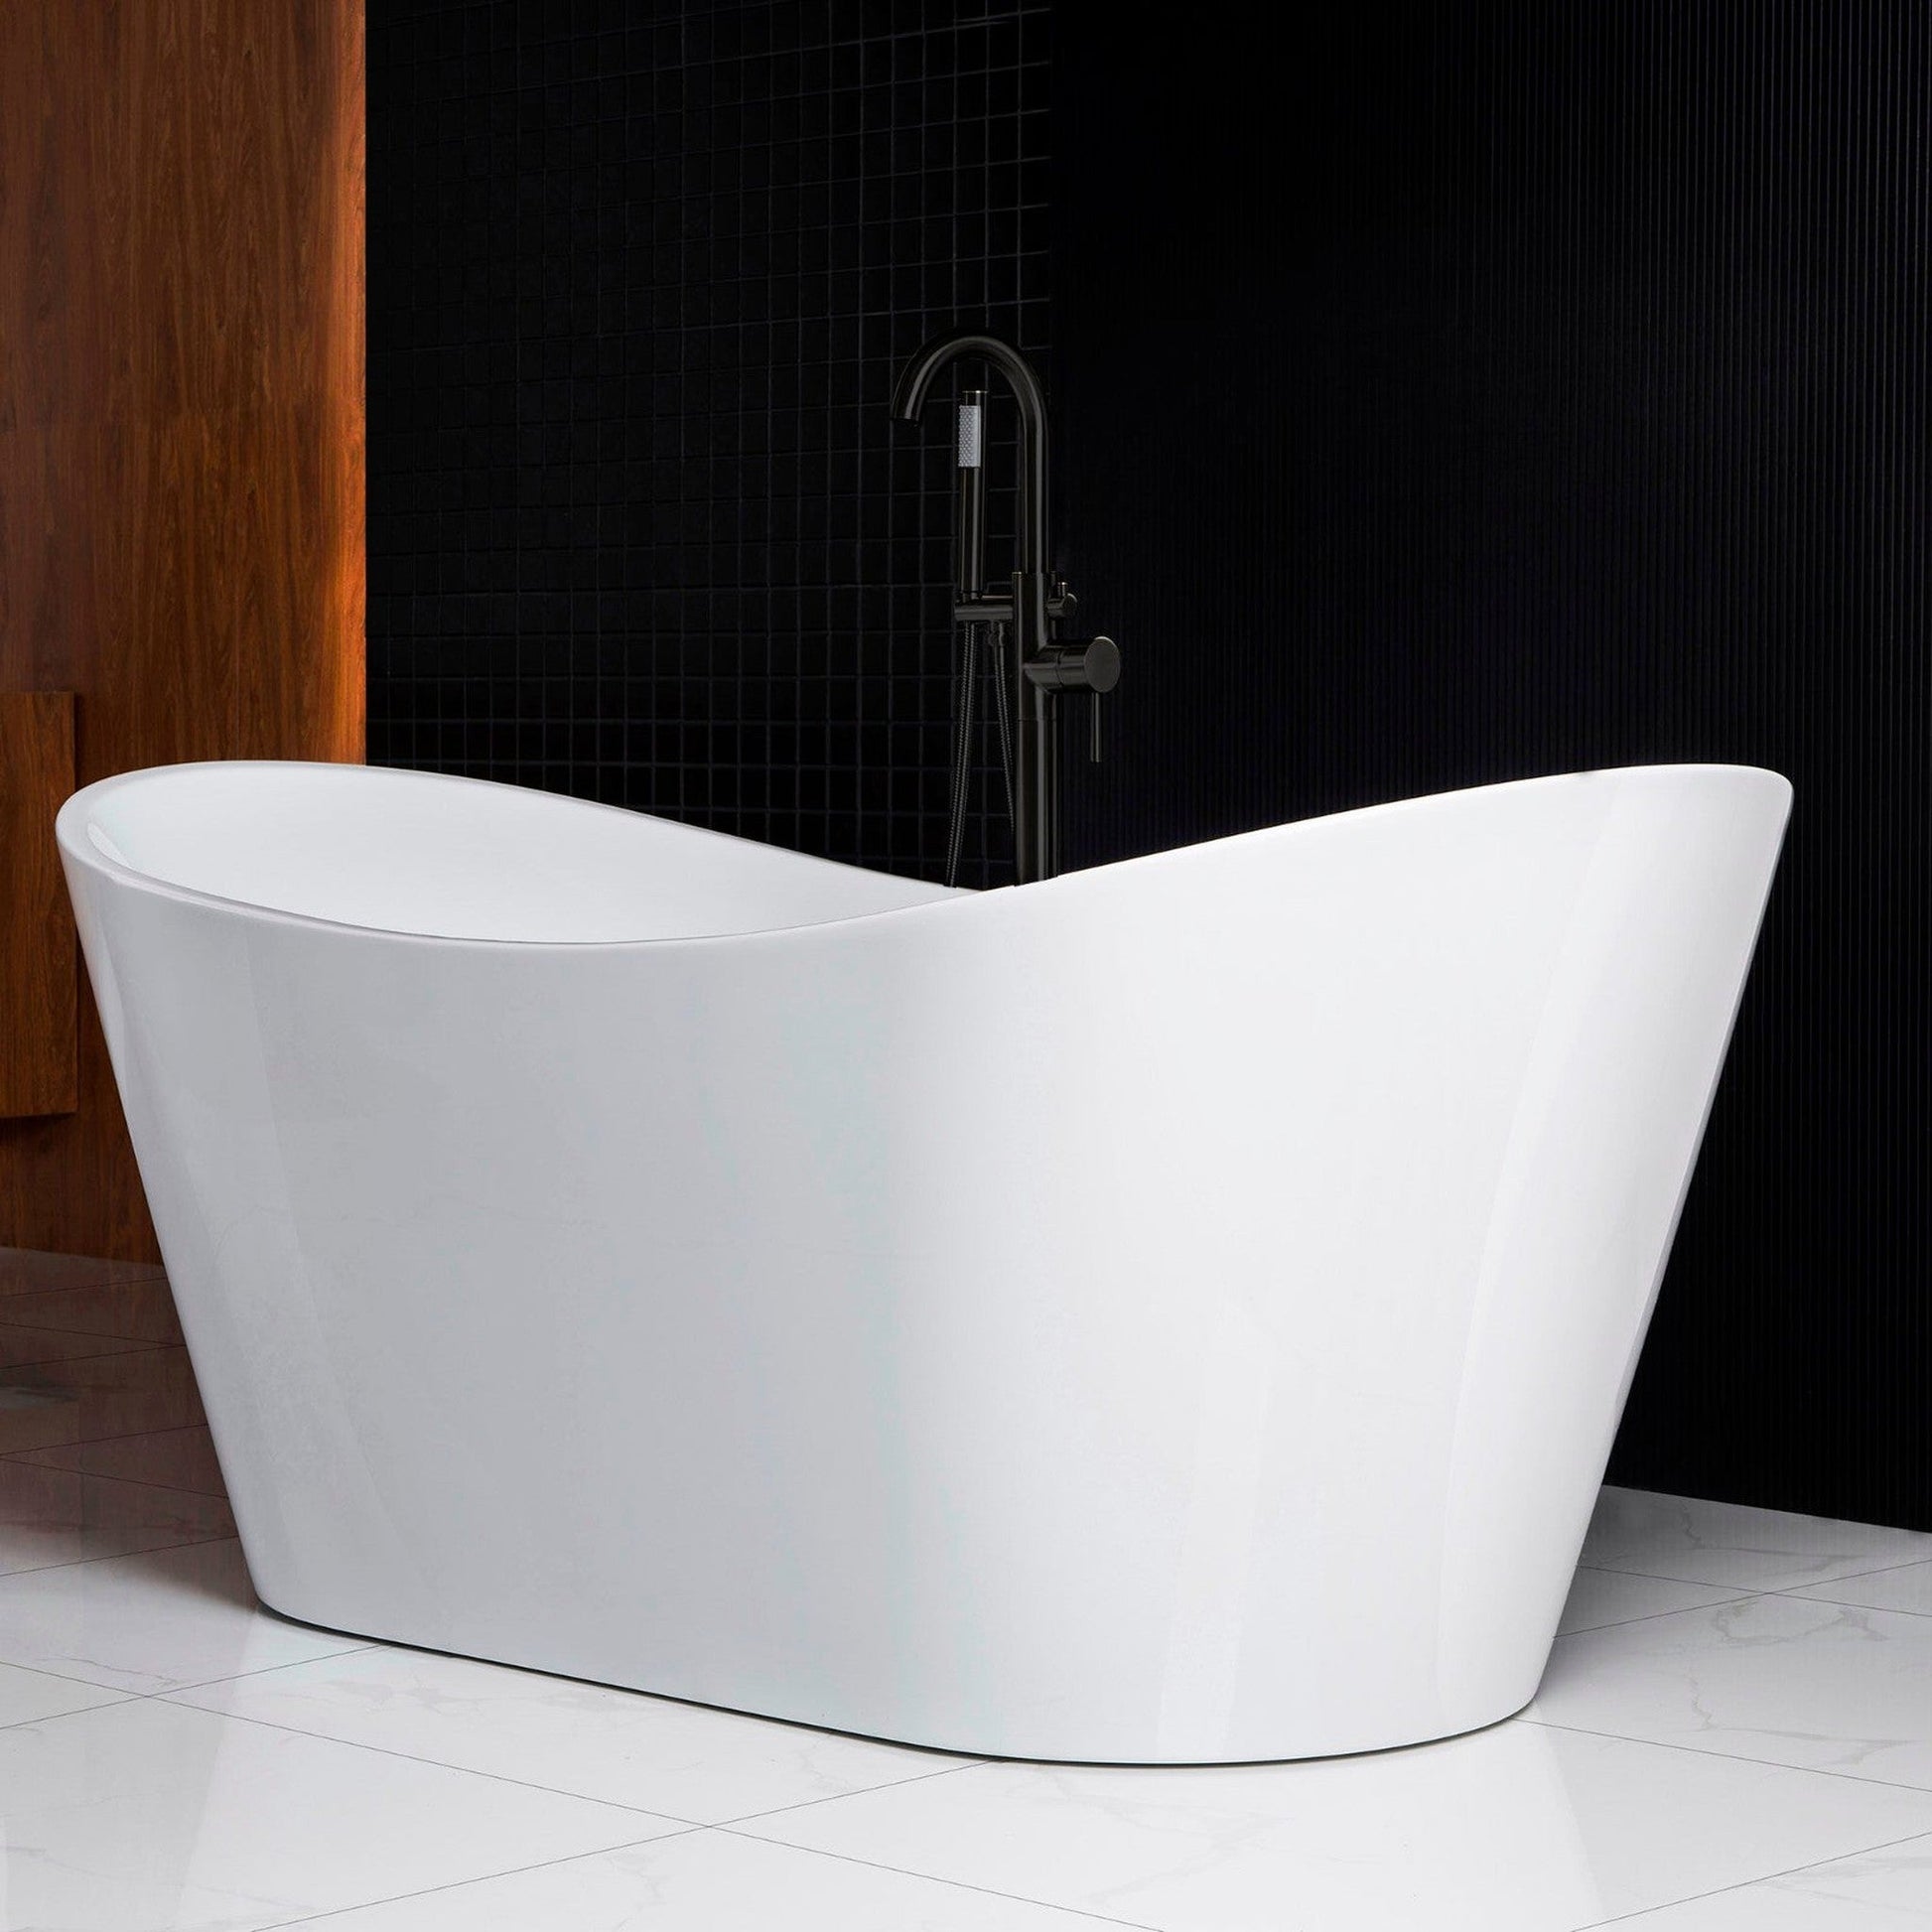 WoodBridge B0010 67" White Acrylic Freestanding Contemporary Soaking Bathtub With Matte Black Drain, Overflow, F0006MBSQ Tub Filler and Caddy Tray